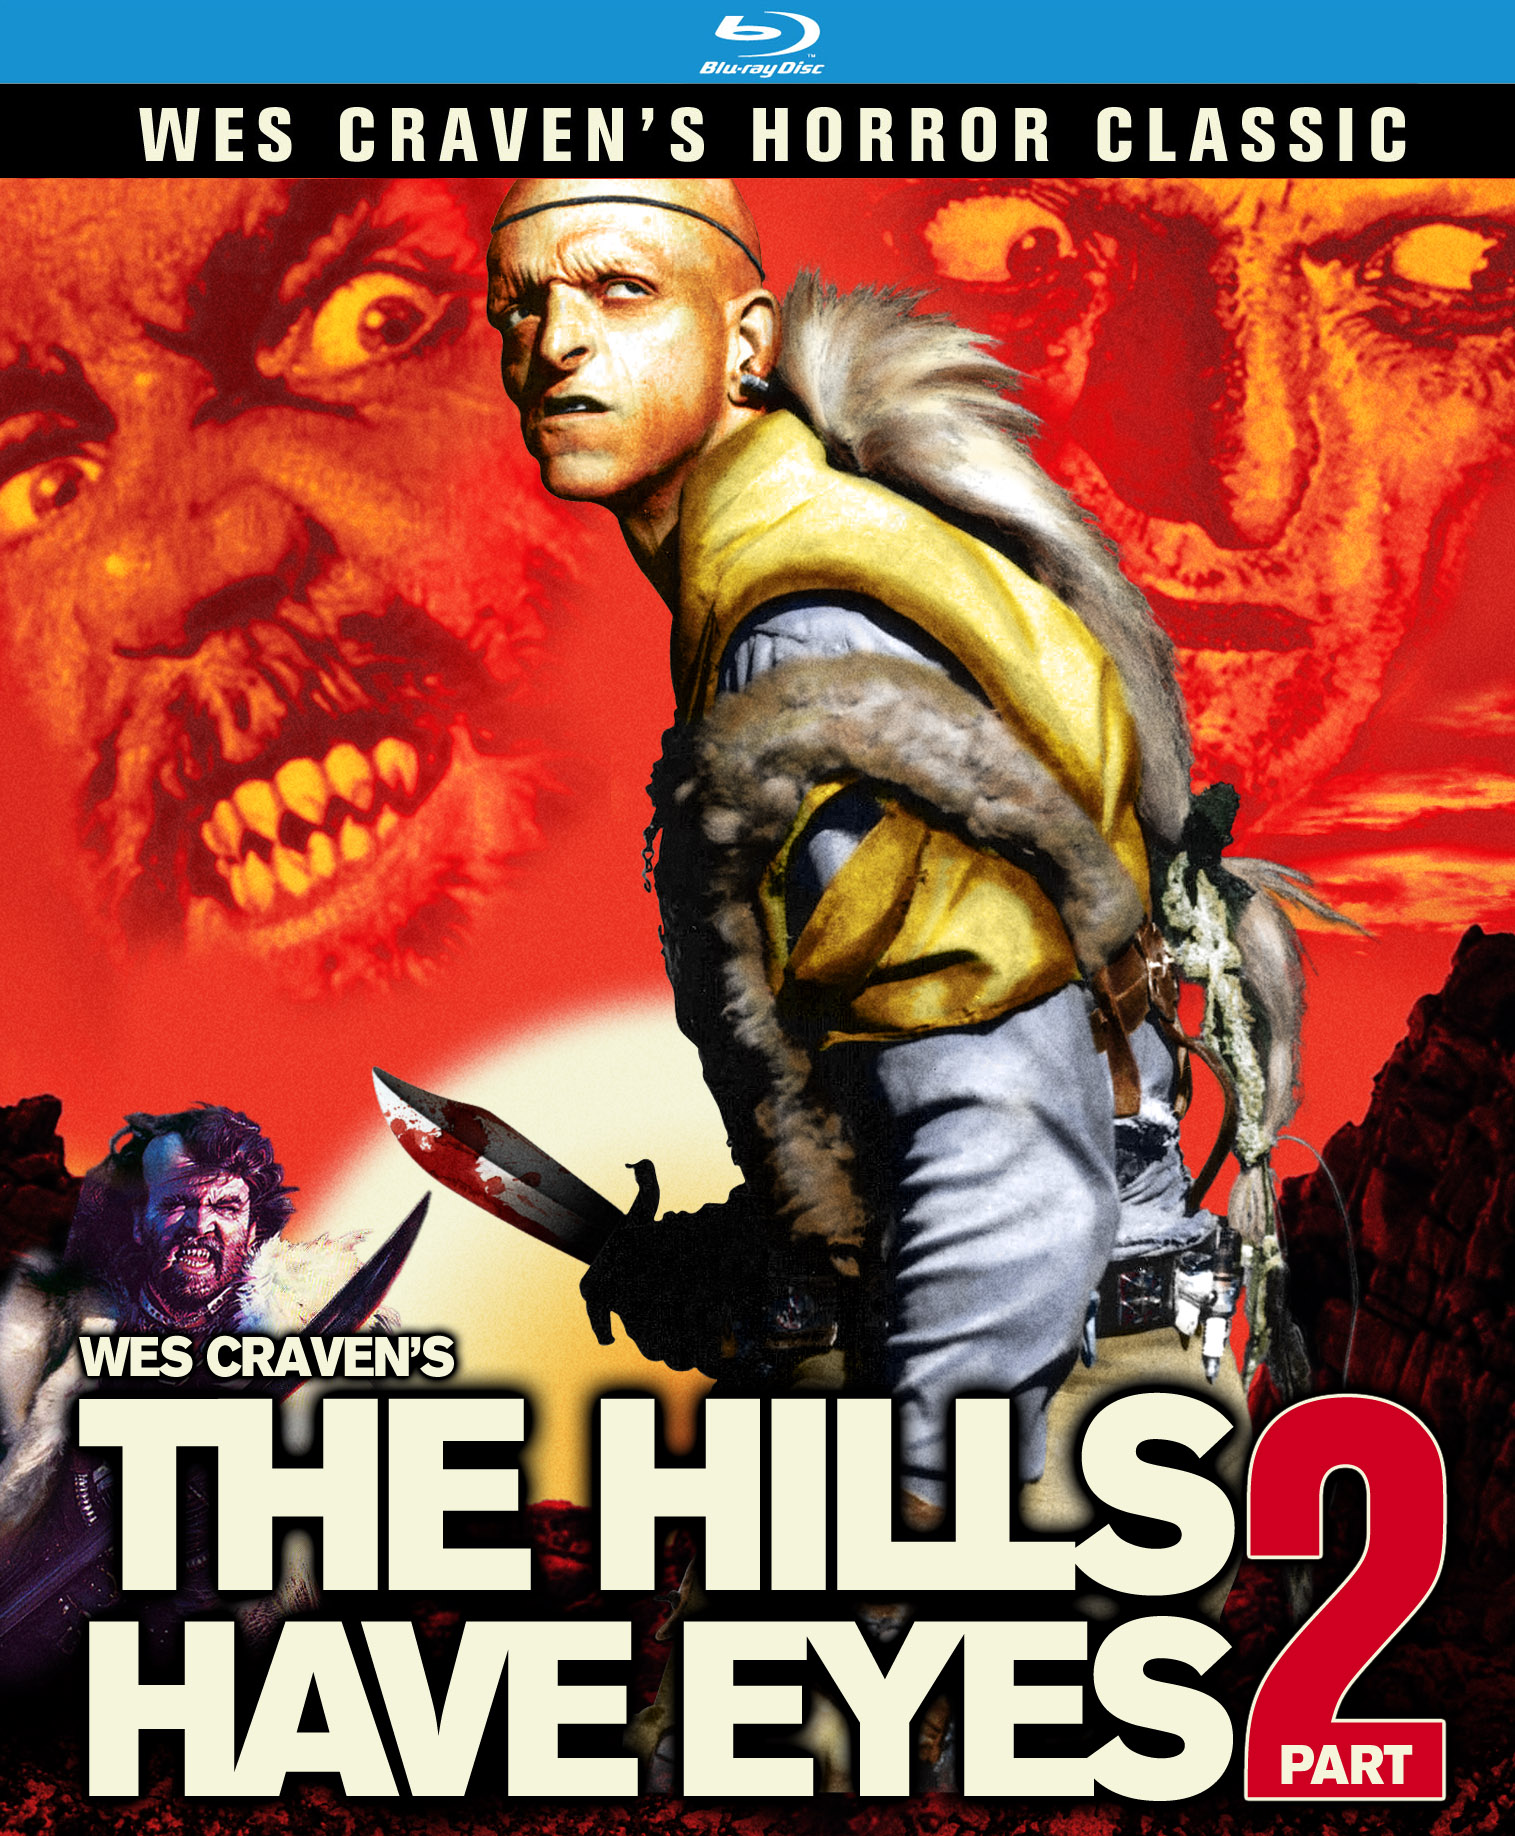 The Hills Have Eyes Porn Scenes - AICN HORROR remembers Wes Craven with an interview, plus looks at ...